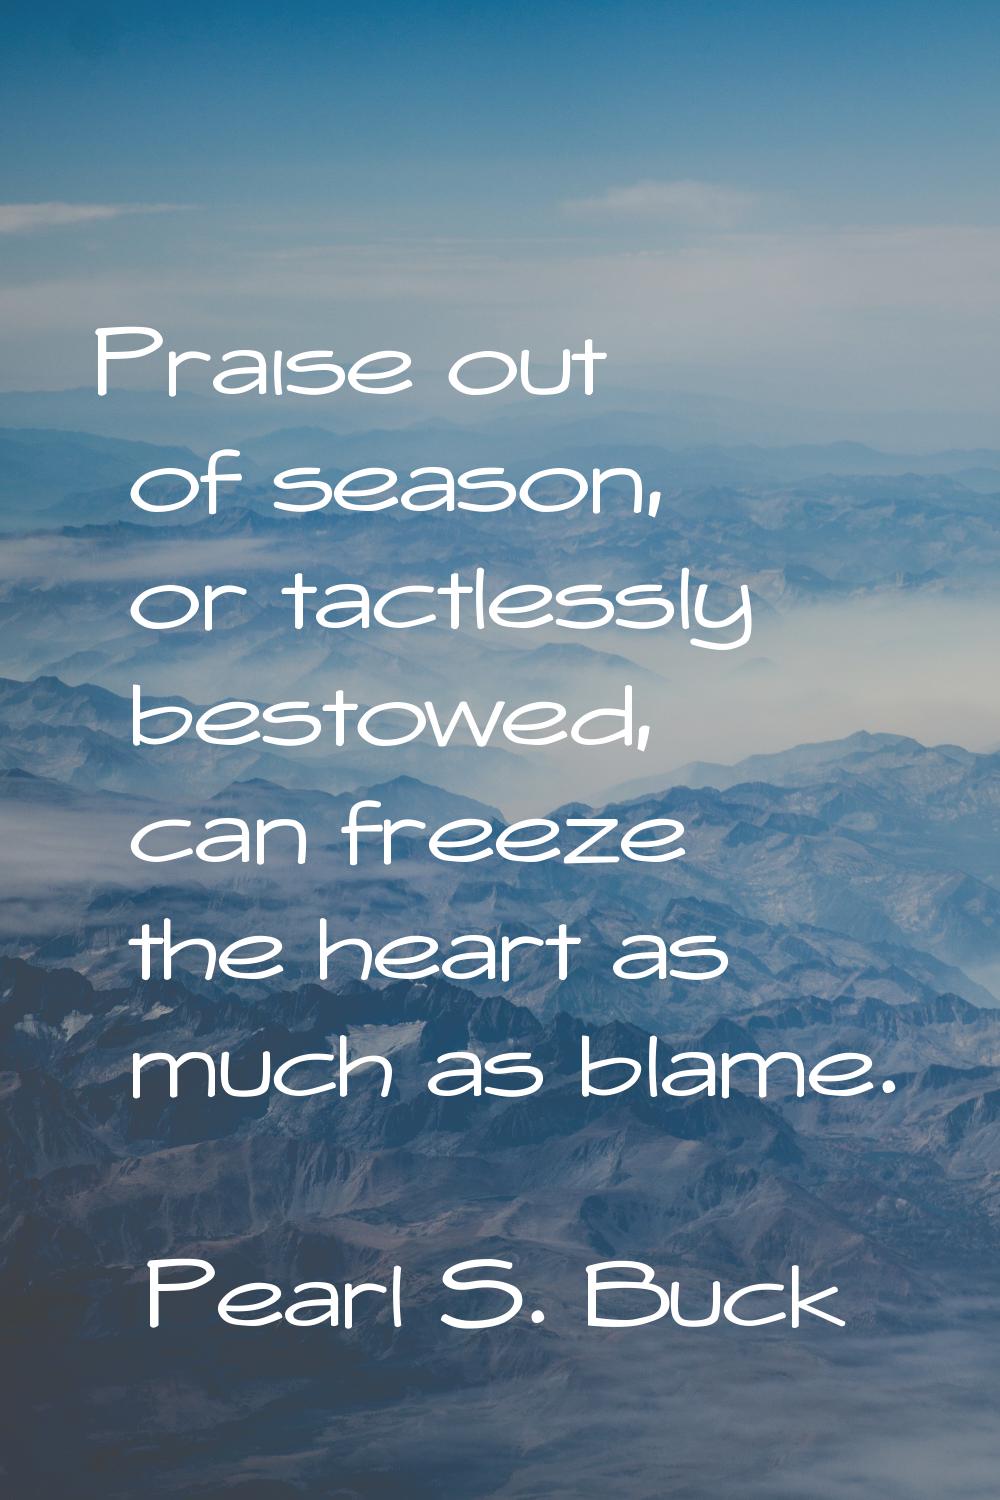 Praise out of season, or tactlessly bestowed, can freeze the heart as much as blame.